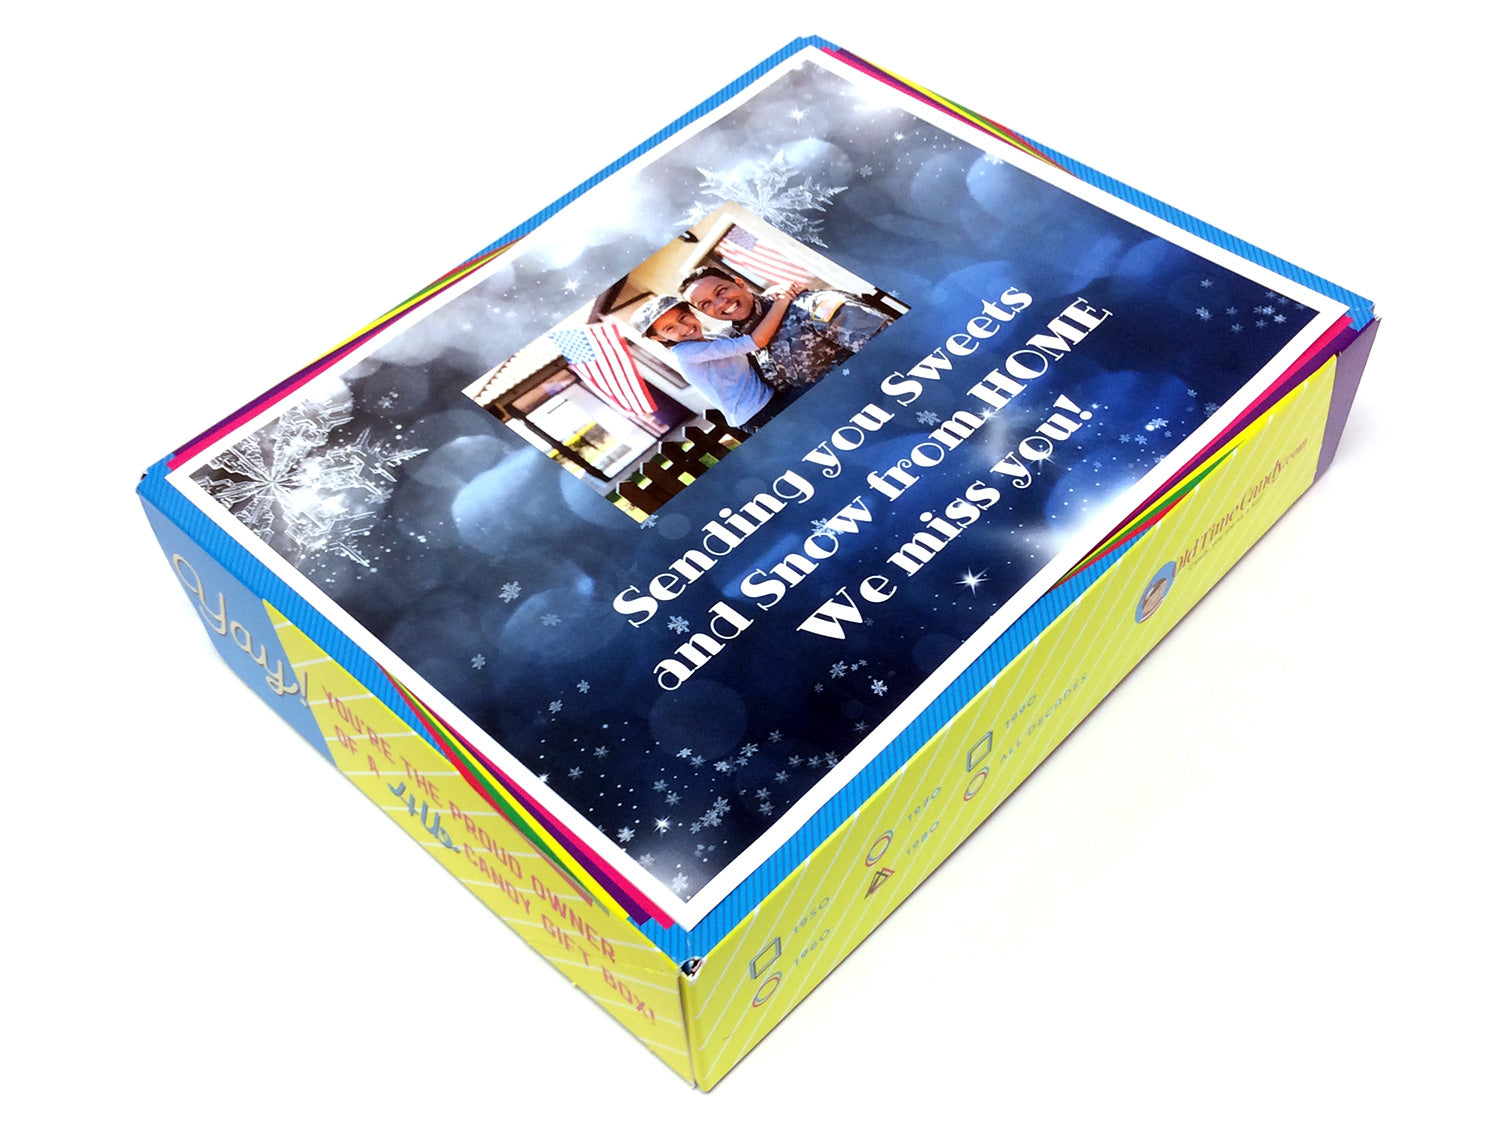 Sample Box Top with message and photo.